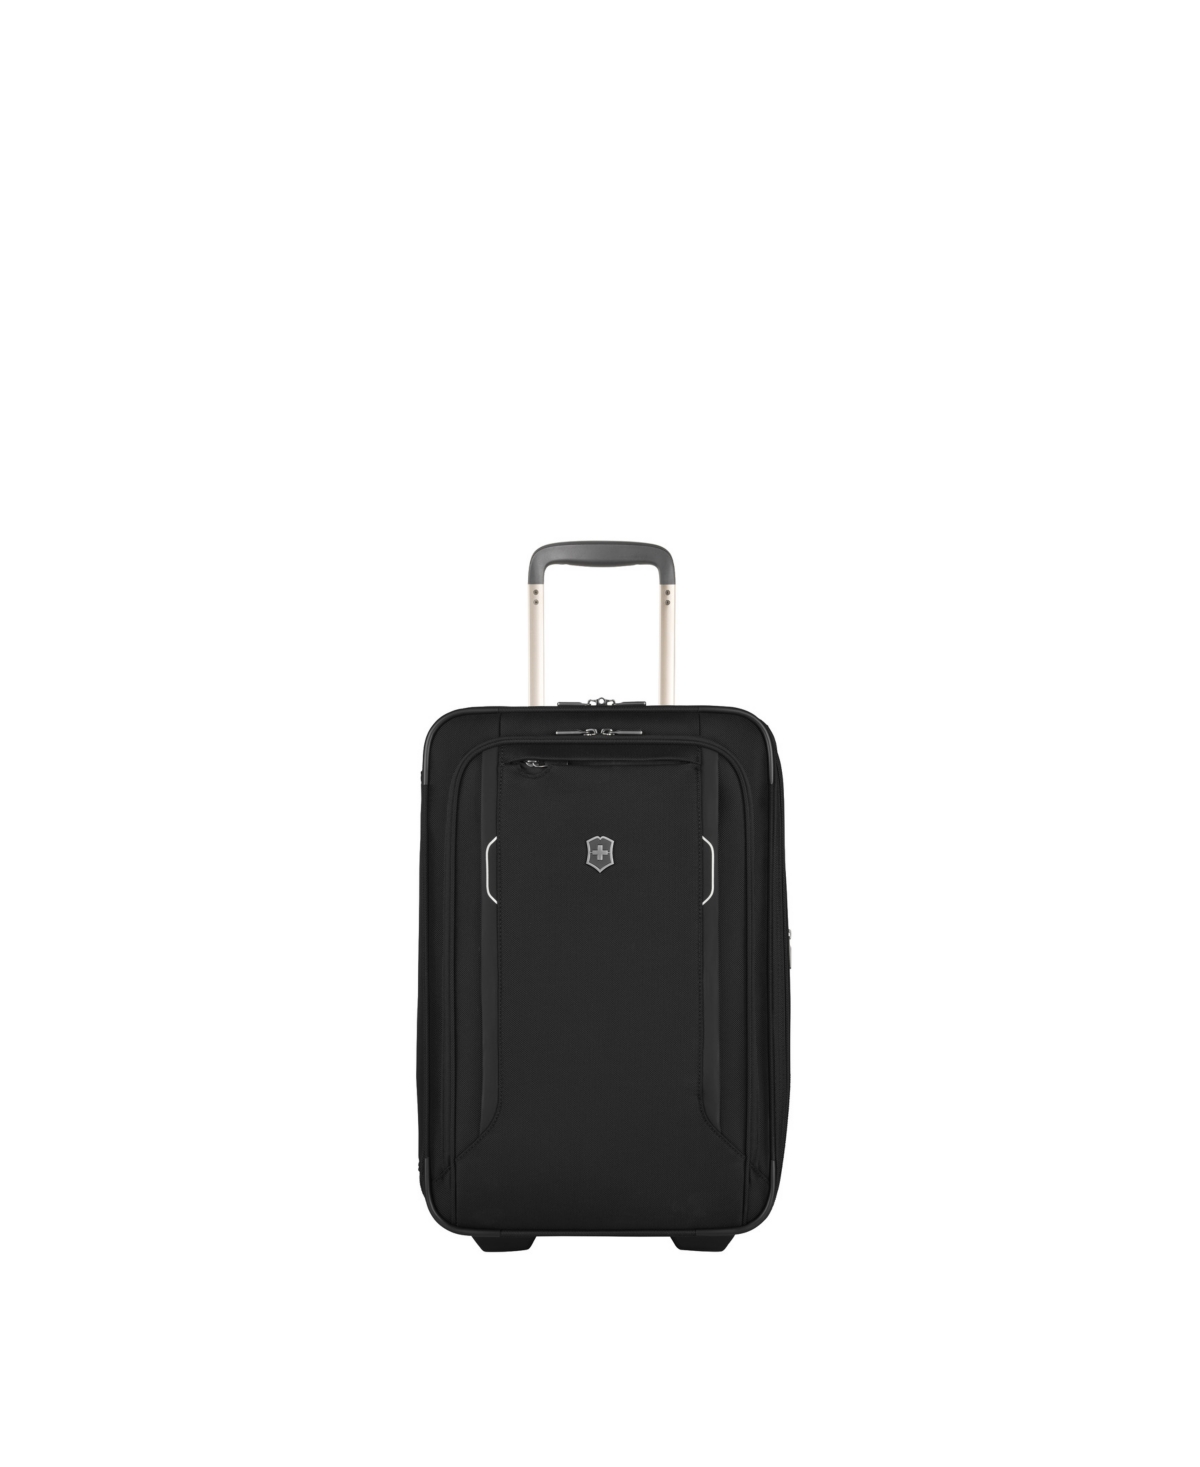 Werks 6.0 2-Wheel Frequent Flyer 20" Carry-On Softside Suitcase - Black